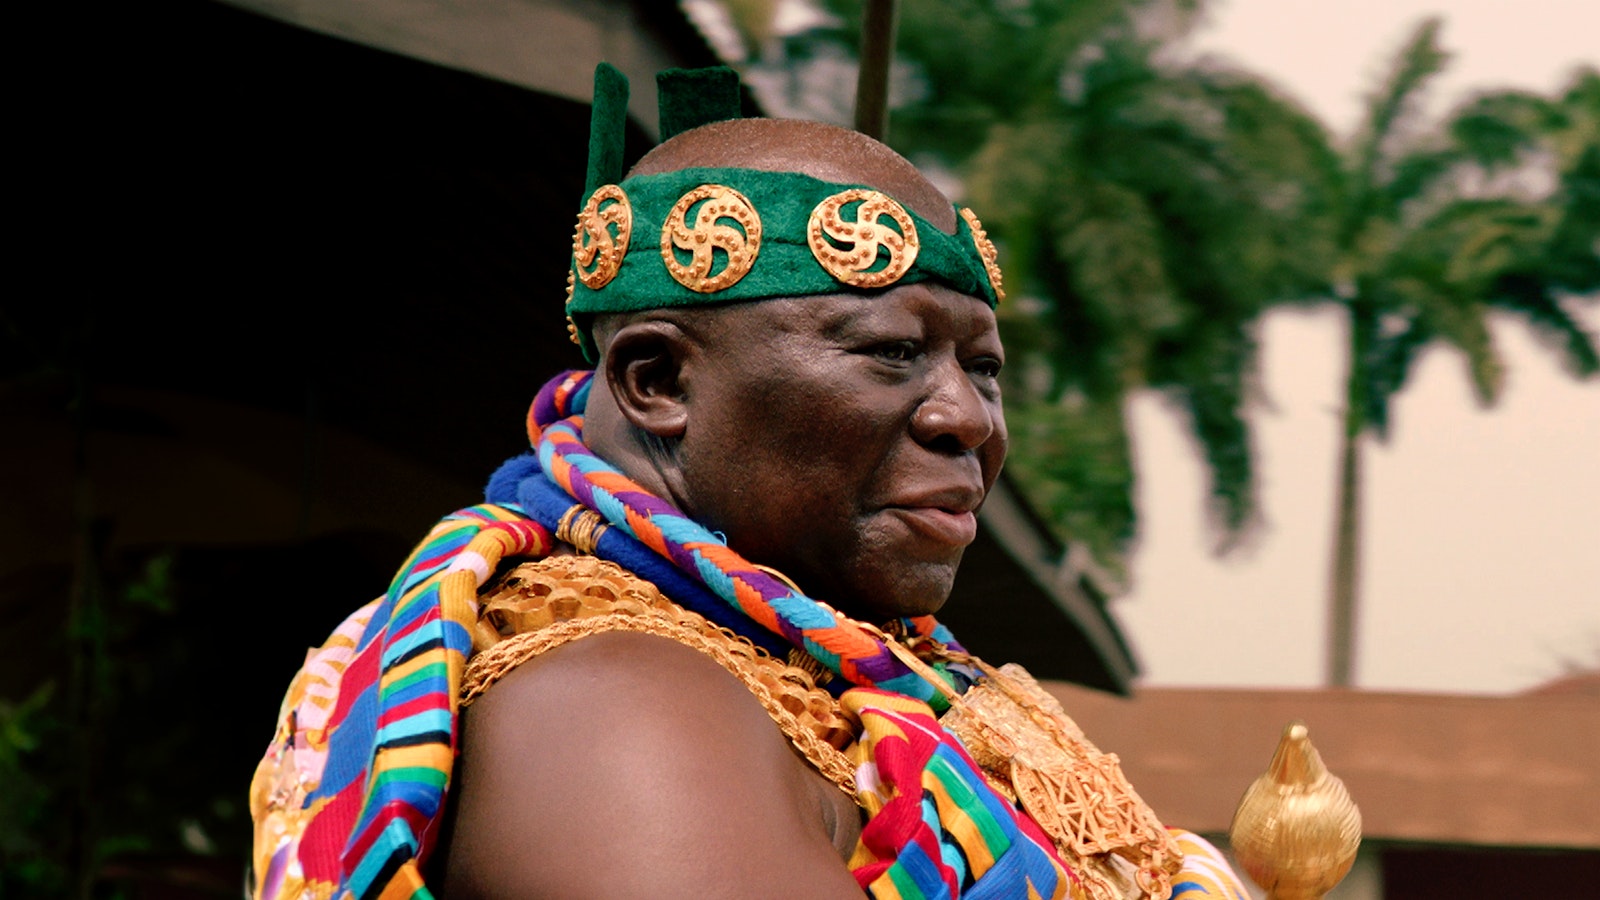 A photo portrait of Ghana's Ashanti King who wears many gold adornments among colourful robes and a green headdress.